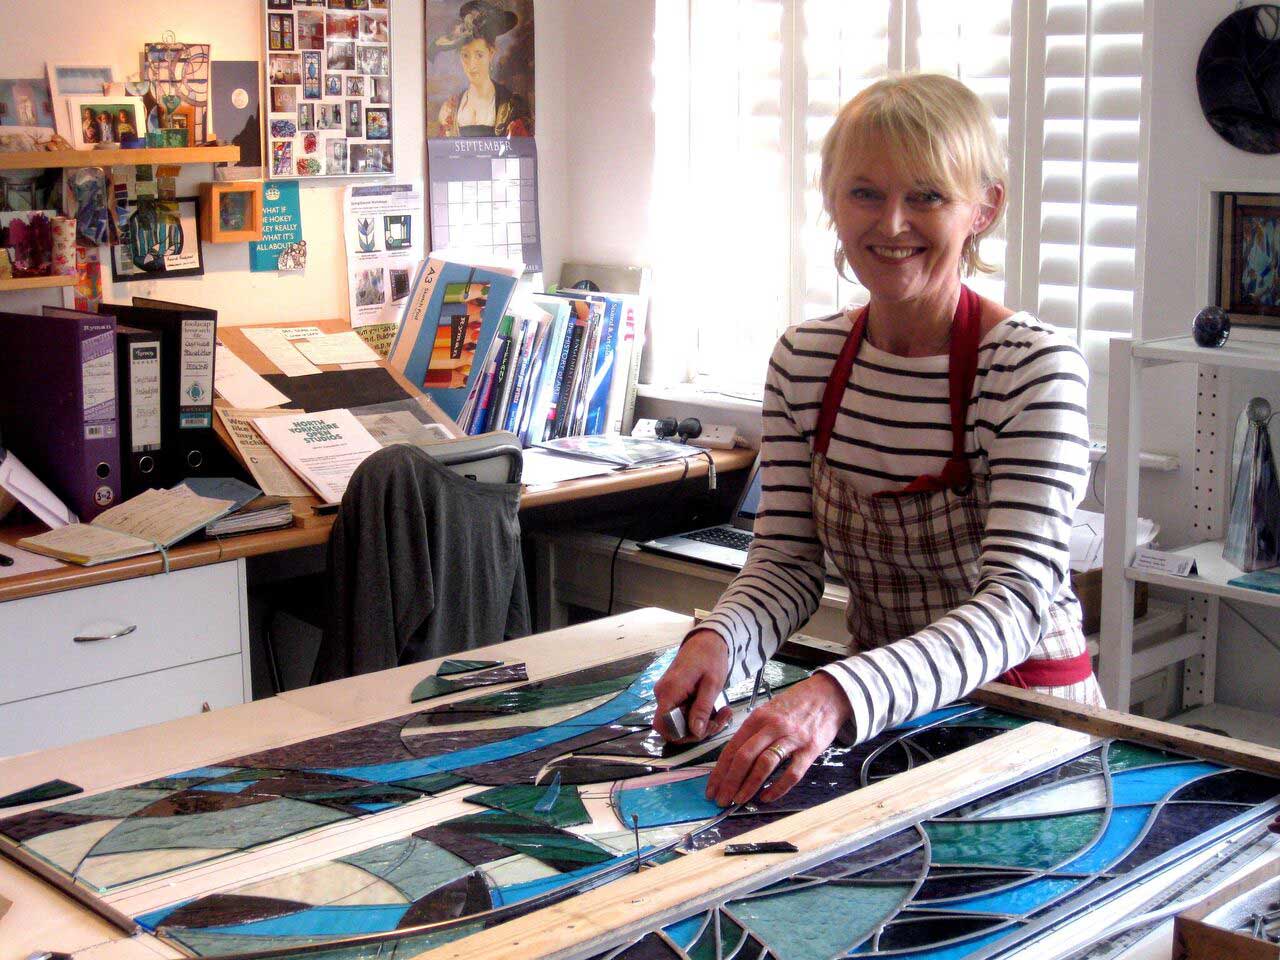 Caryl Hallett, who works in stained glass – her studio is in Starbeck - is exhibiting at made for Giving